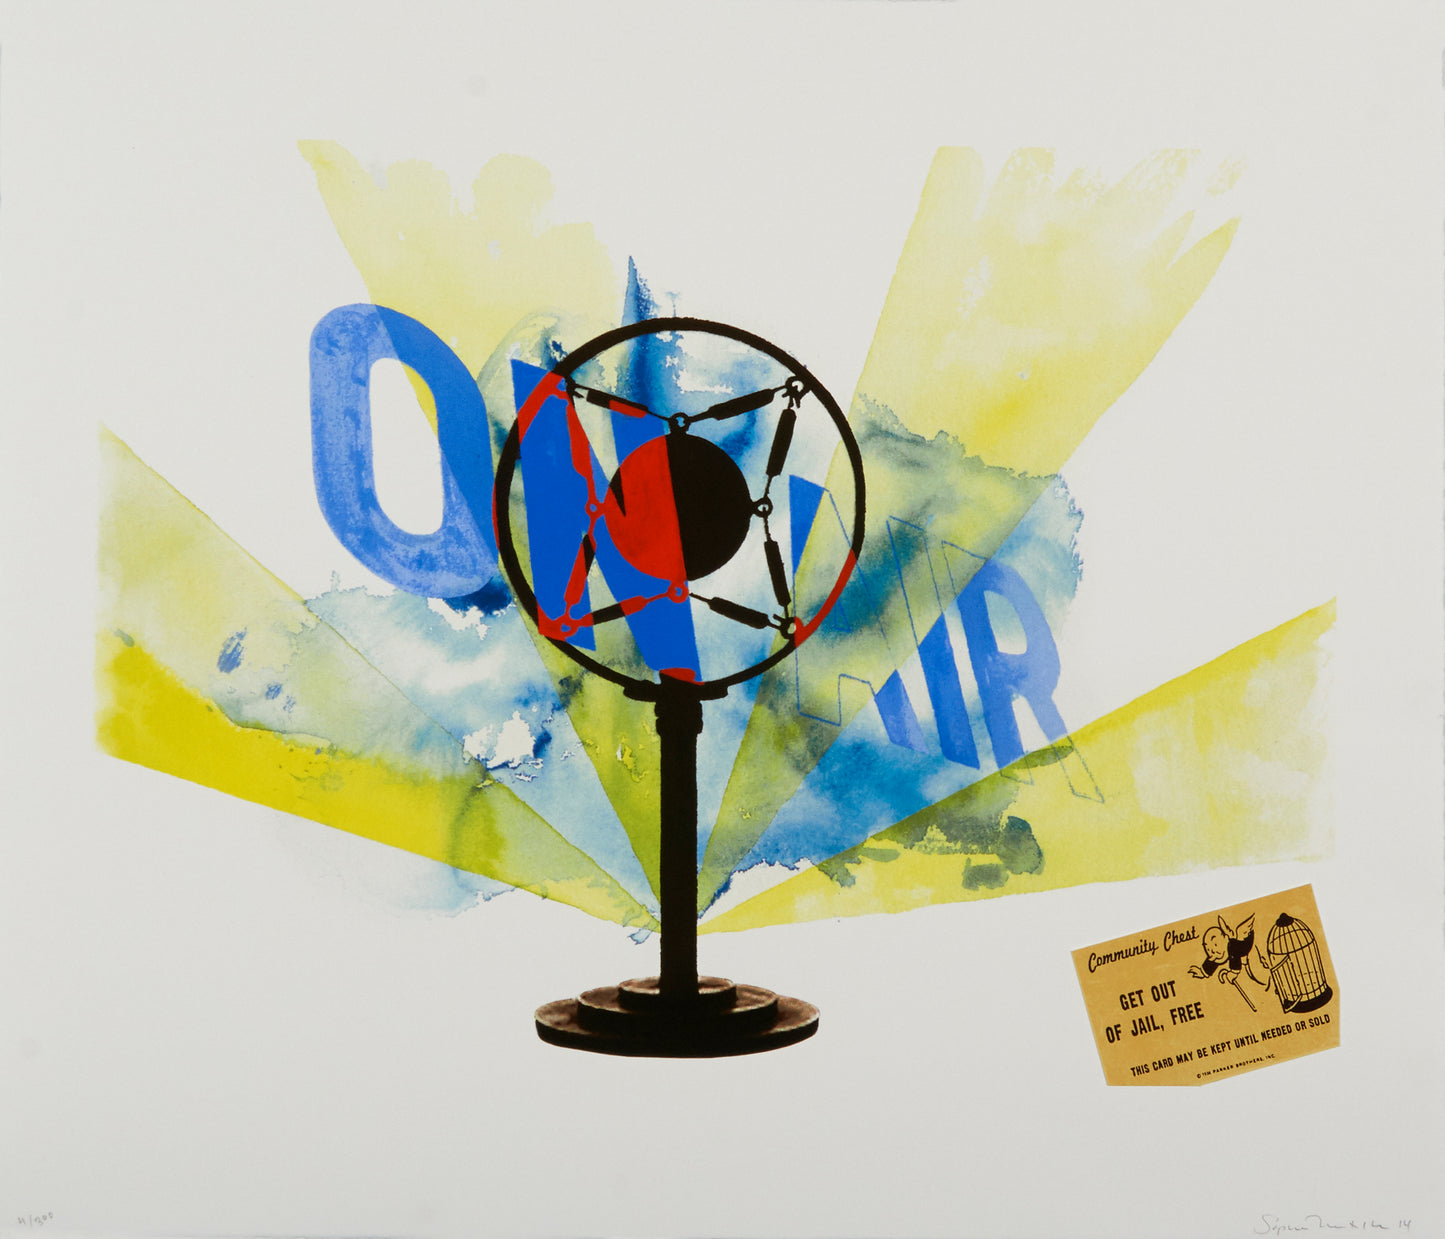 "On Air" by Sophie Matisse, 2014 - Mourlot Editions - Fine_Art - Poster - Lithograph - Wall Art - Vintage - Prints - Original